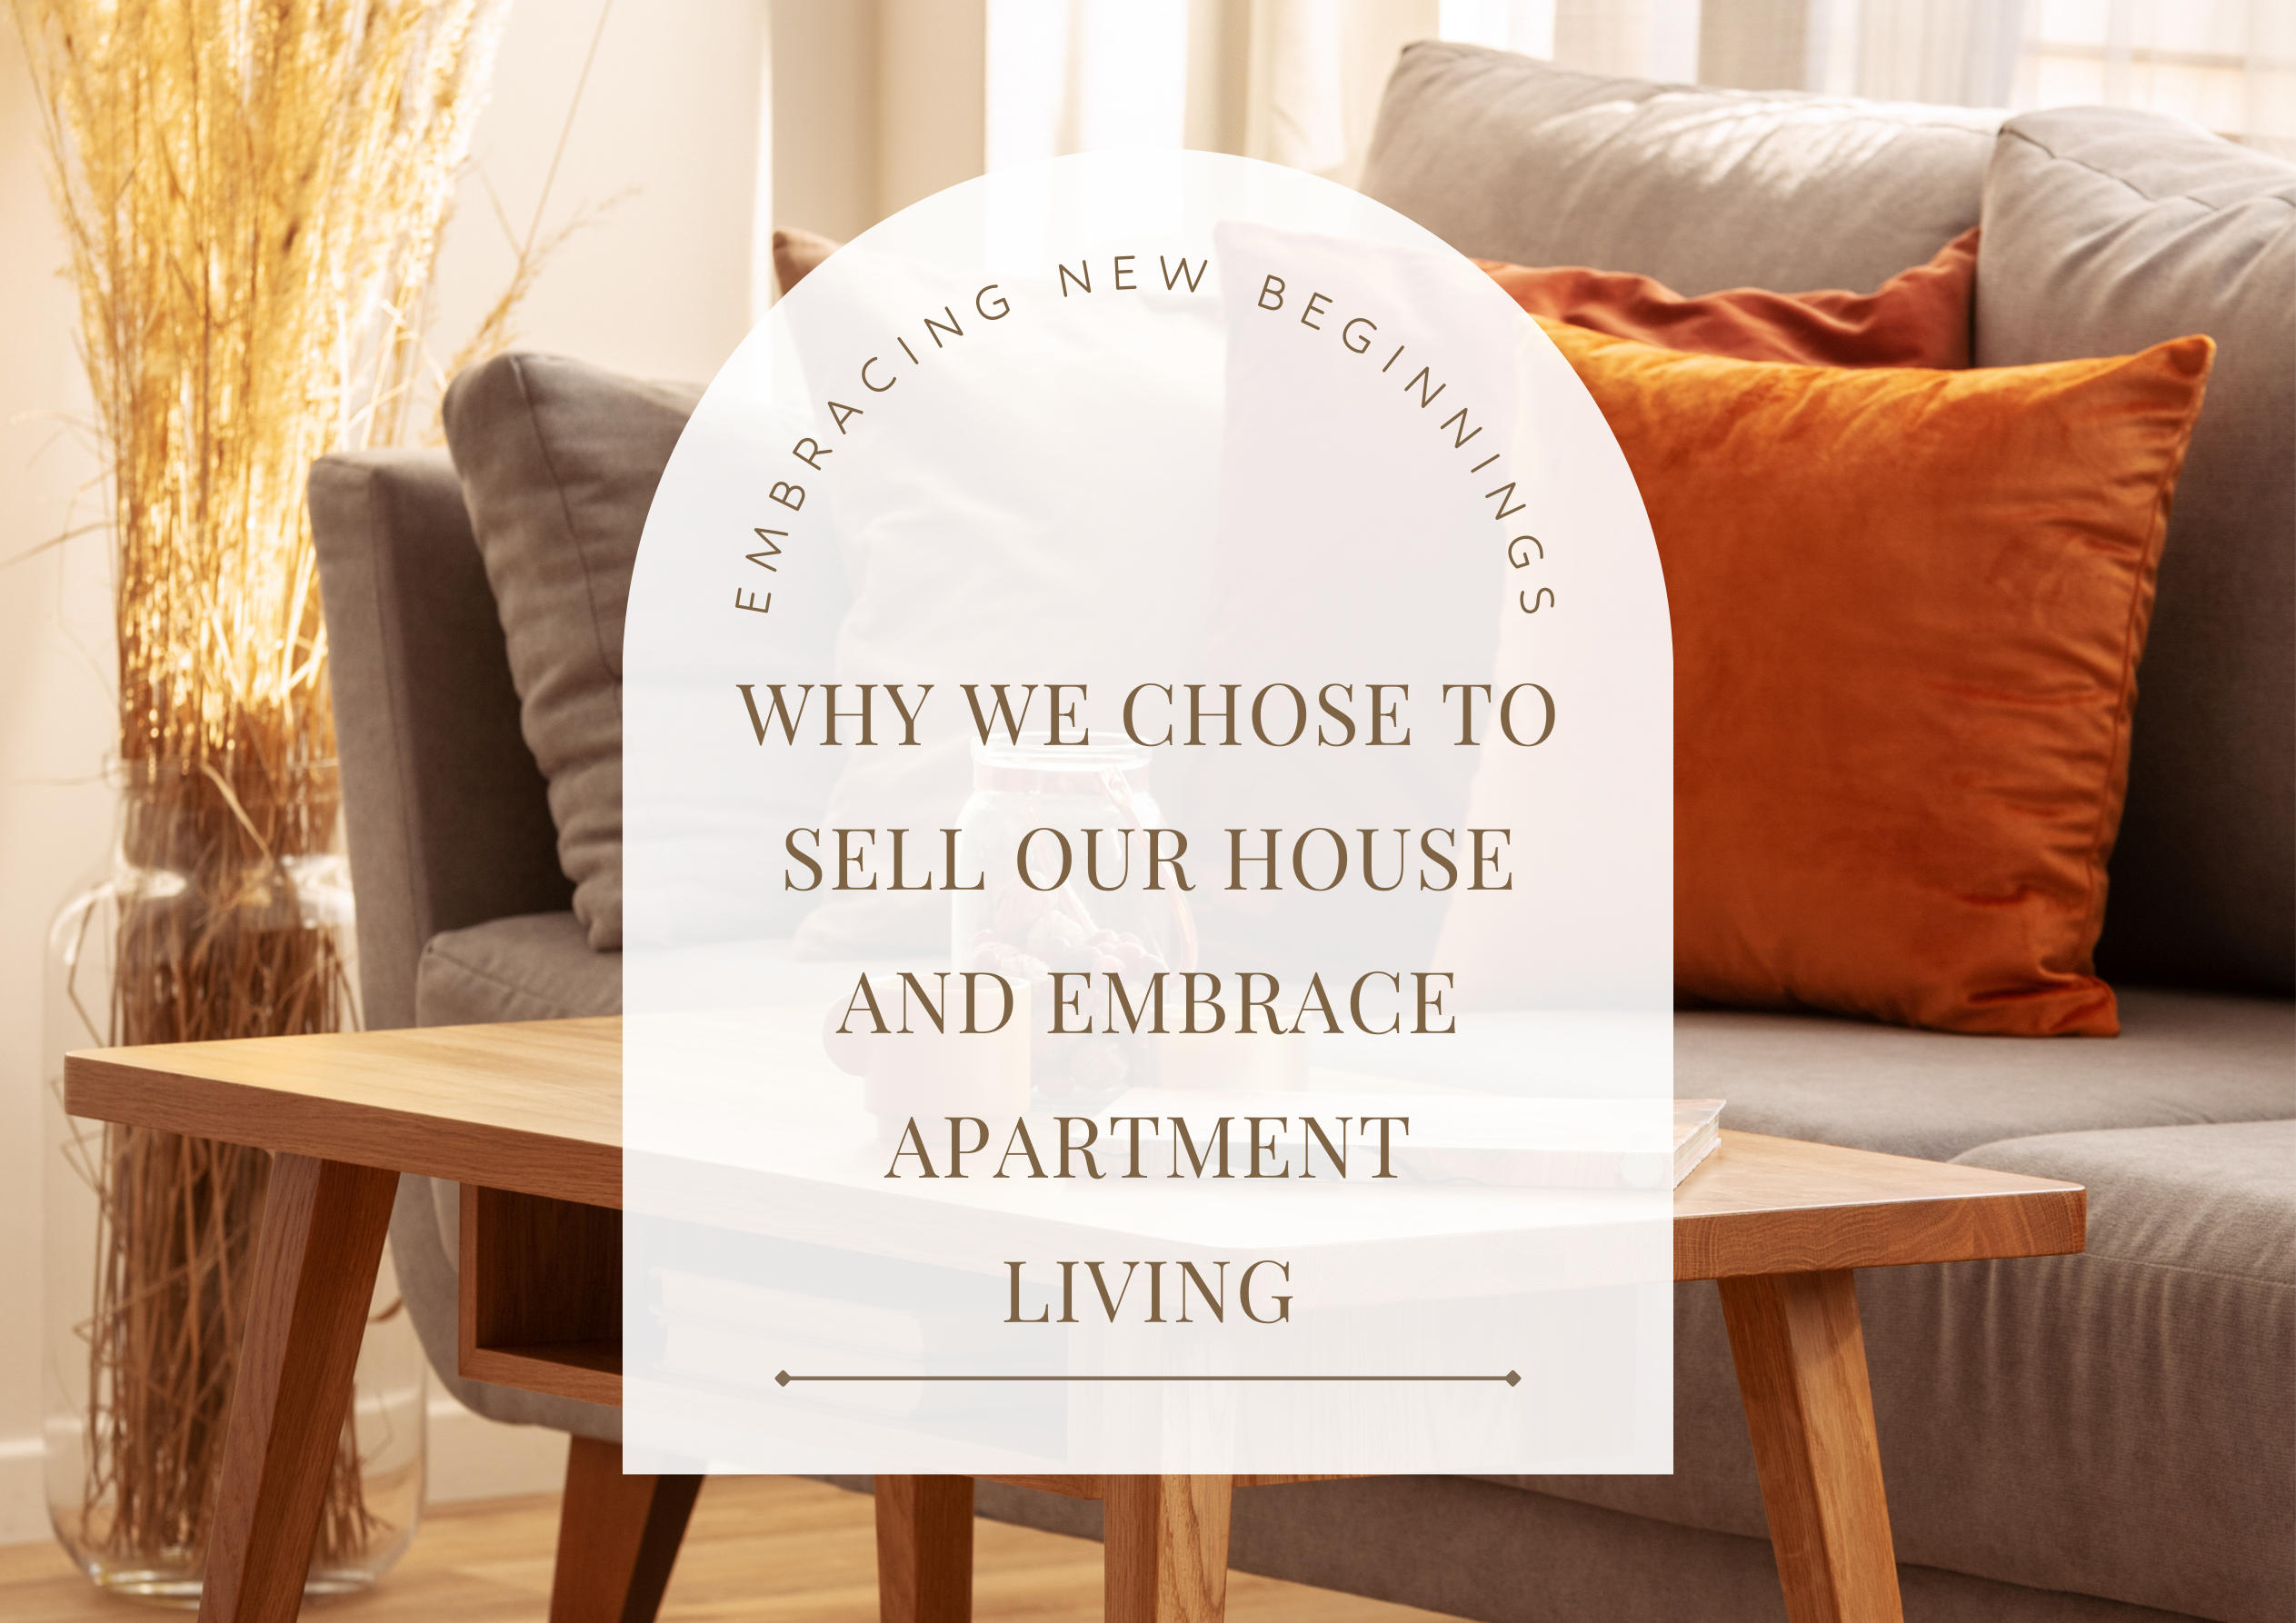 Embracing New Beginnings: Why We Chose to Sell Our House and Embrace Apartment Living